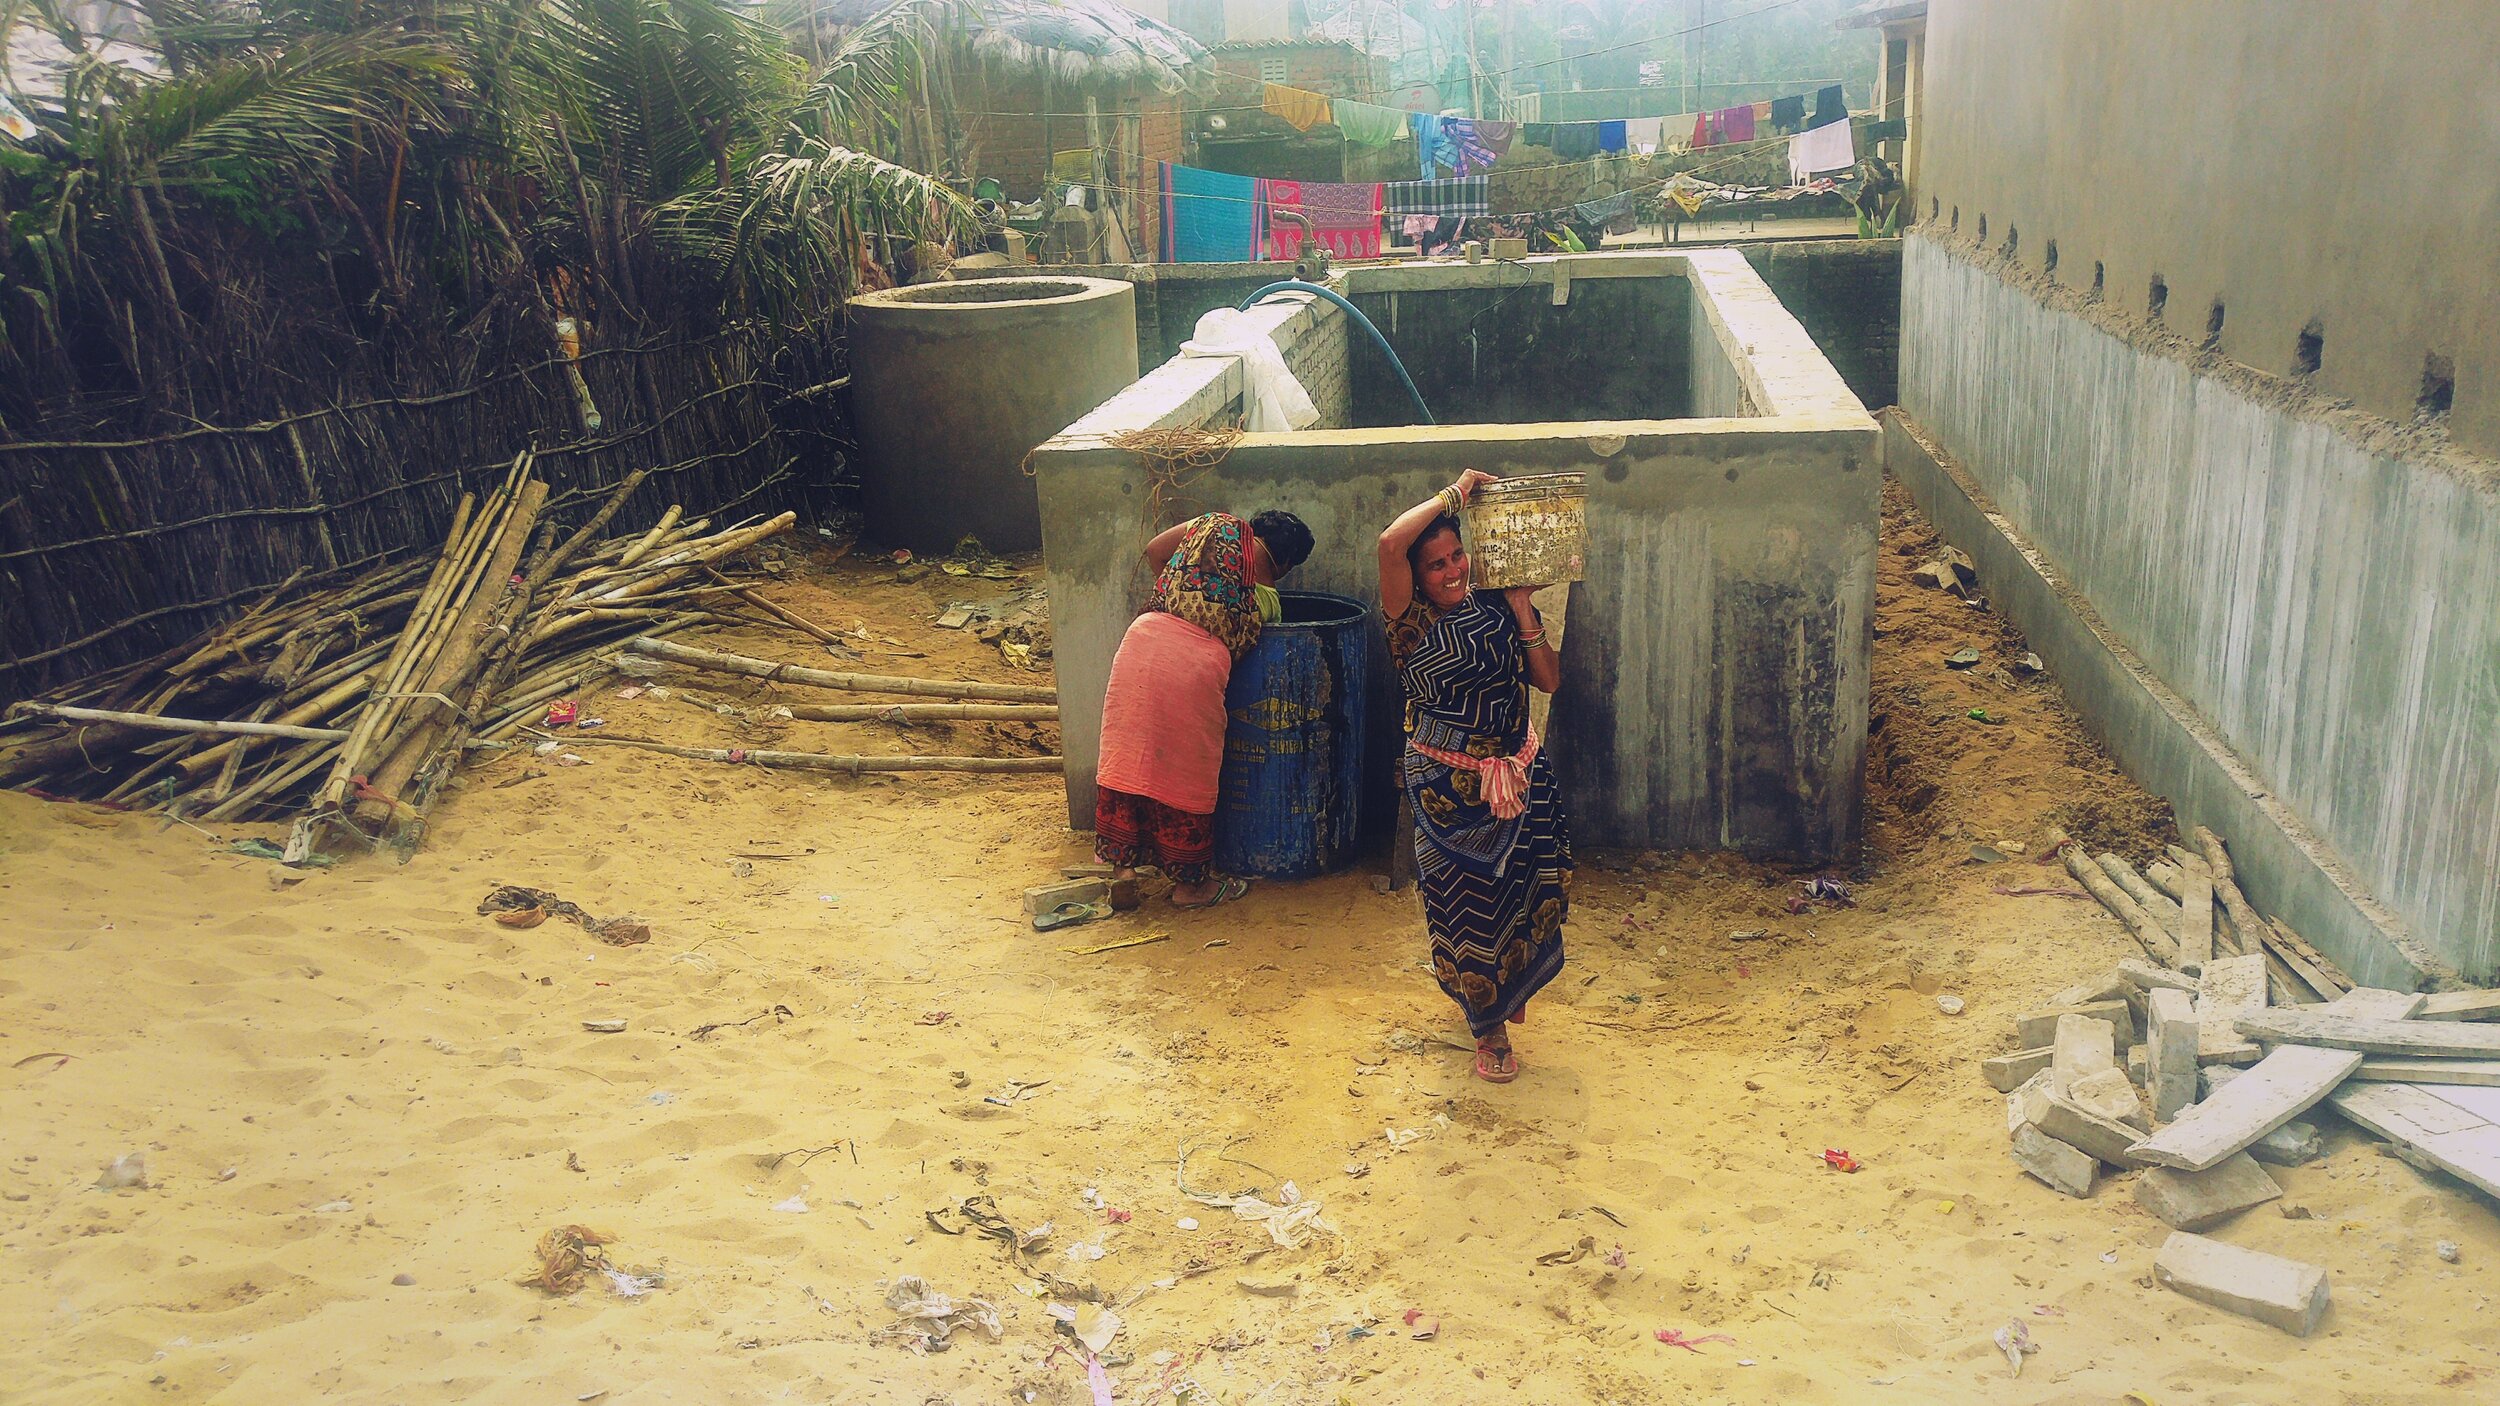 Community infrastructure getting built as part of the slum upgradation plan  